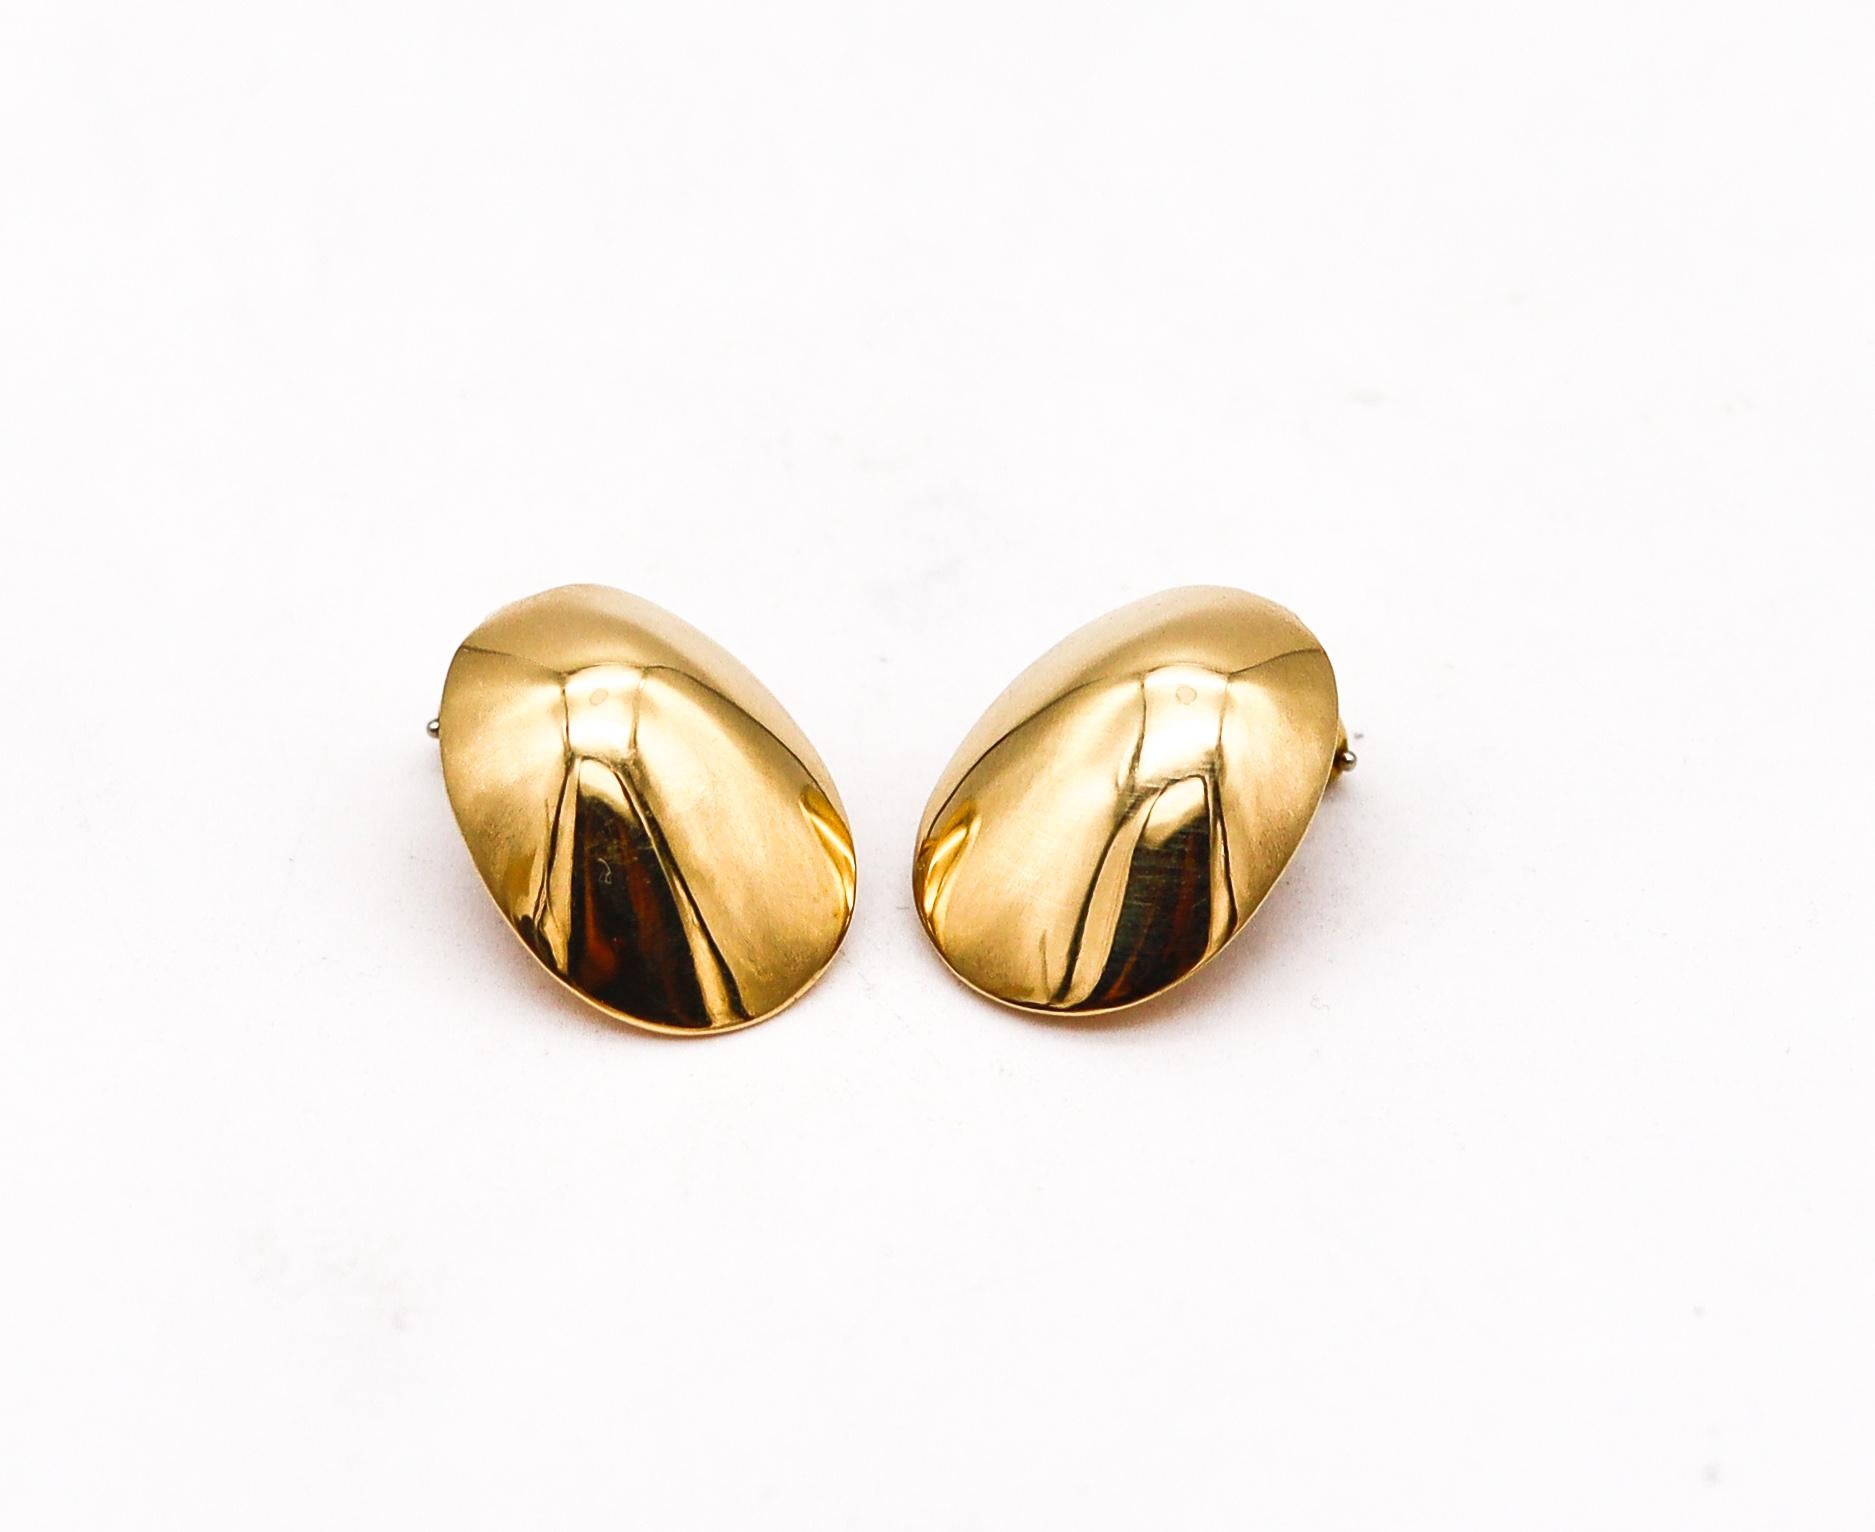 Modernist Tiffany & Co. 1978 Angela Cummings Rare Oval Convex Clip Earrings in 18Kt Gold For Sale